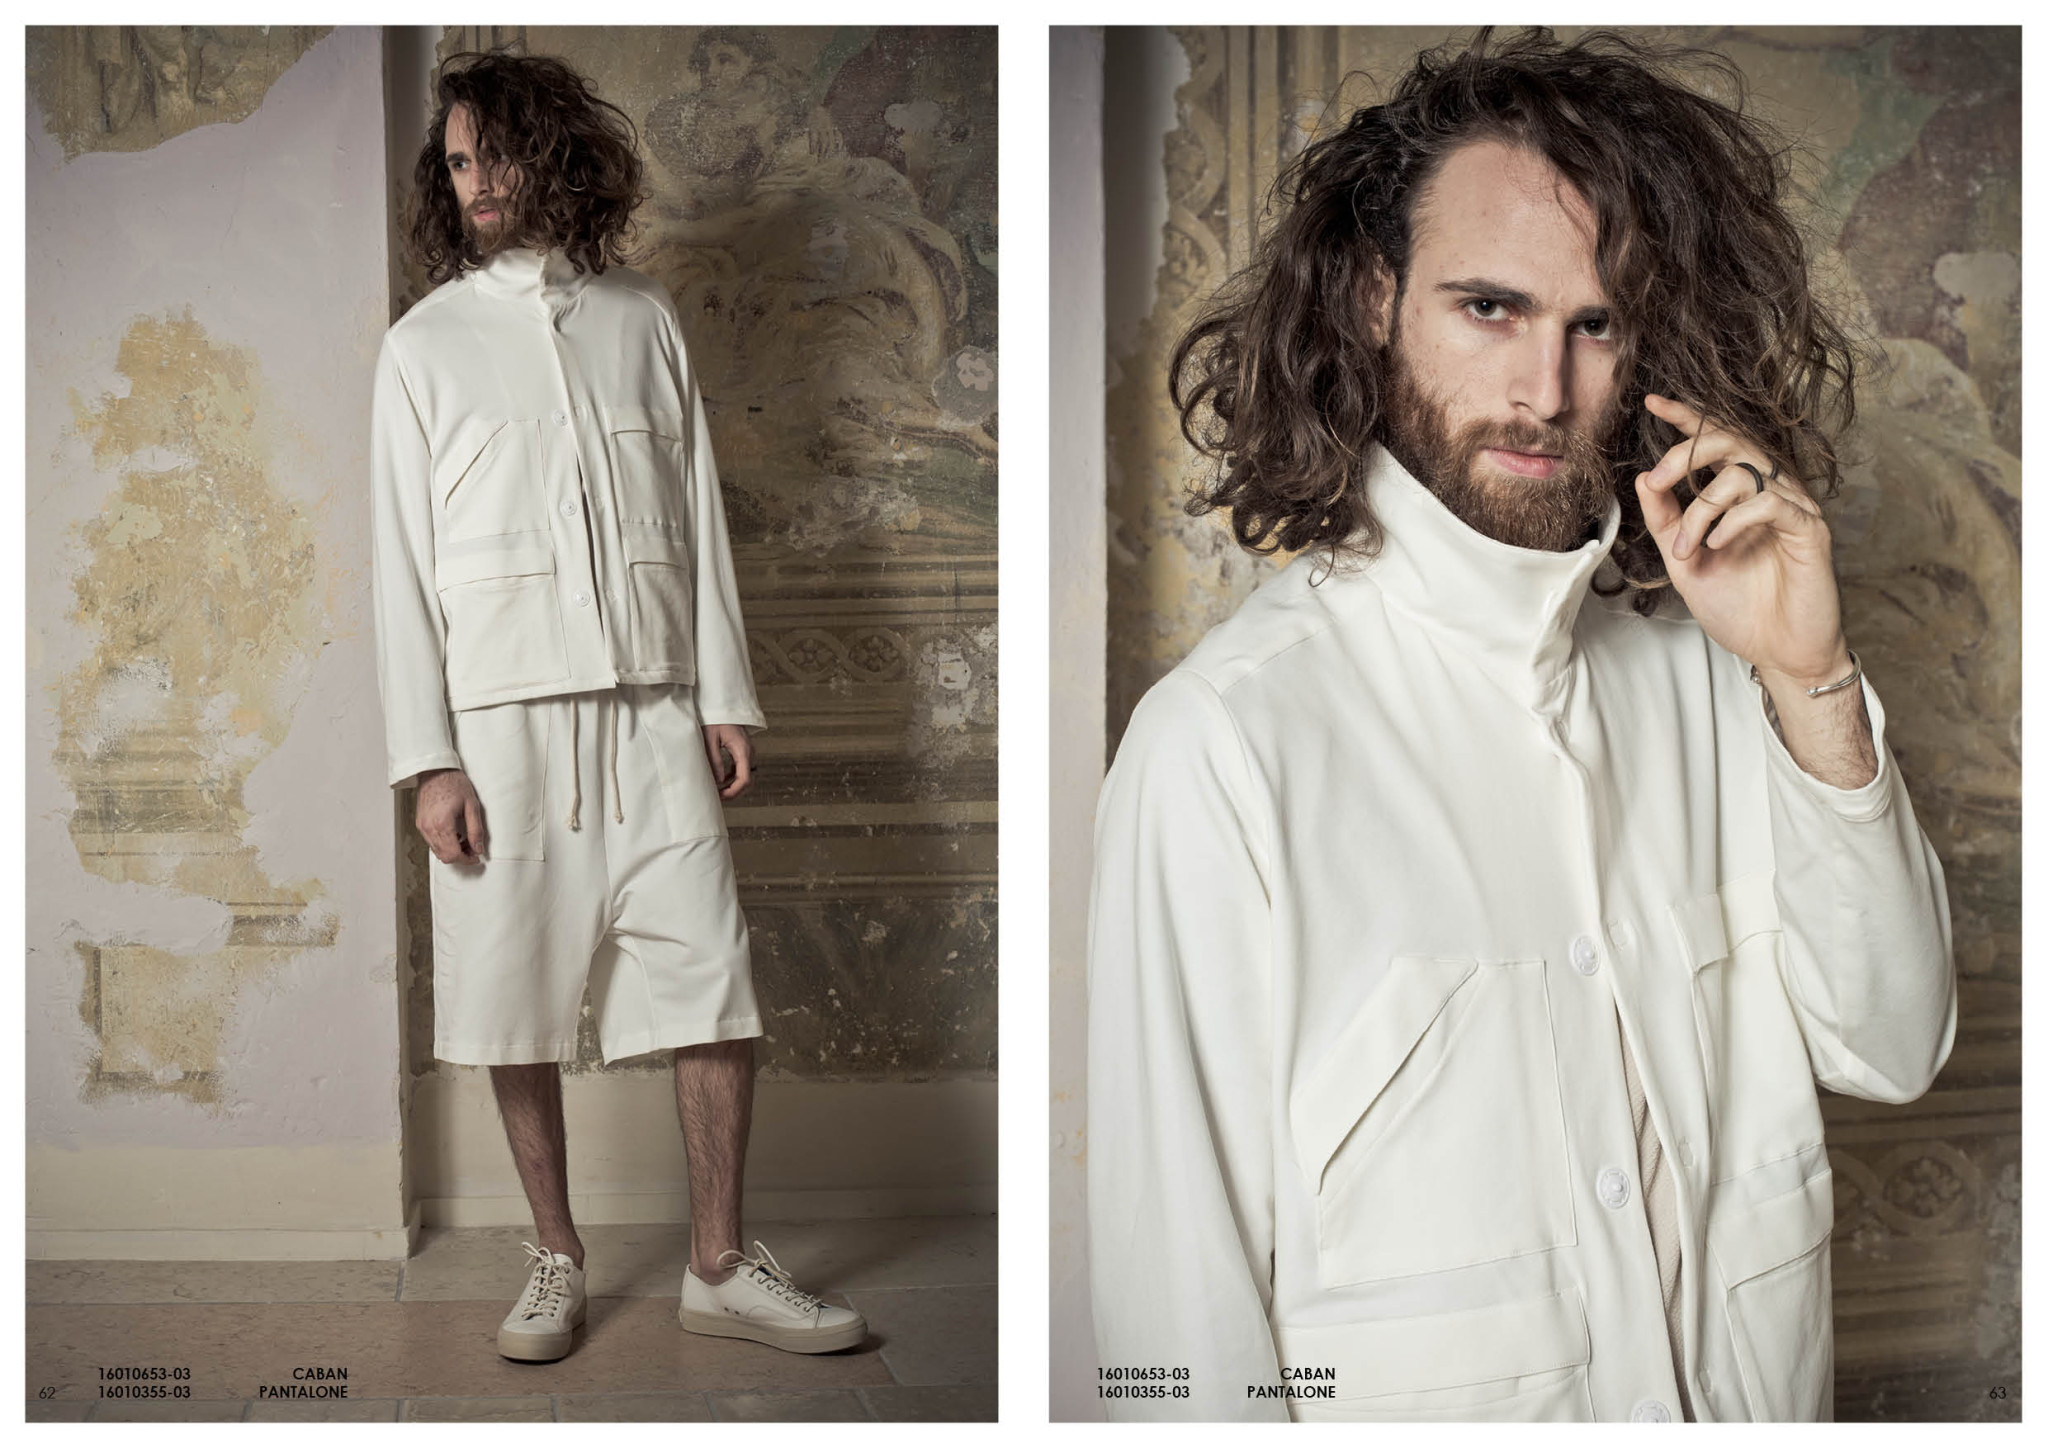 Hashtagmart look book spring summer 2016 fashion brand, invented and created in Italy